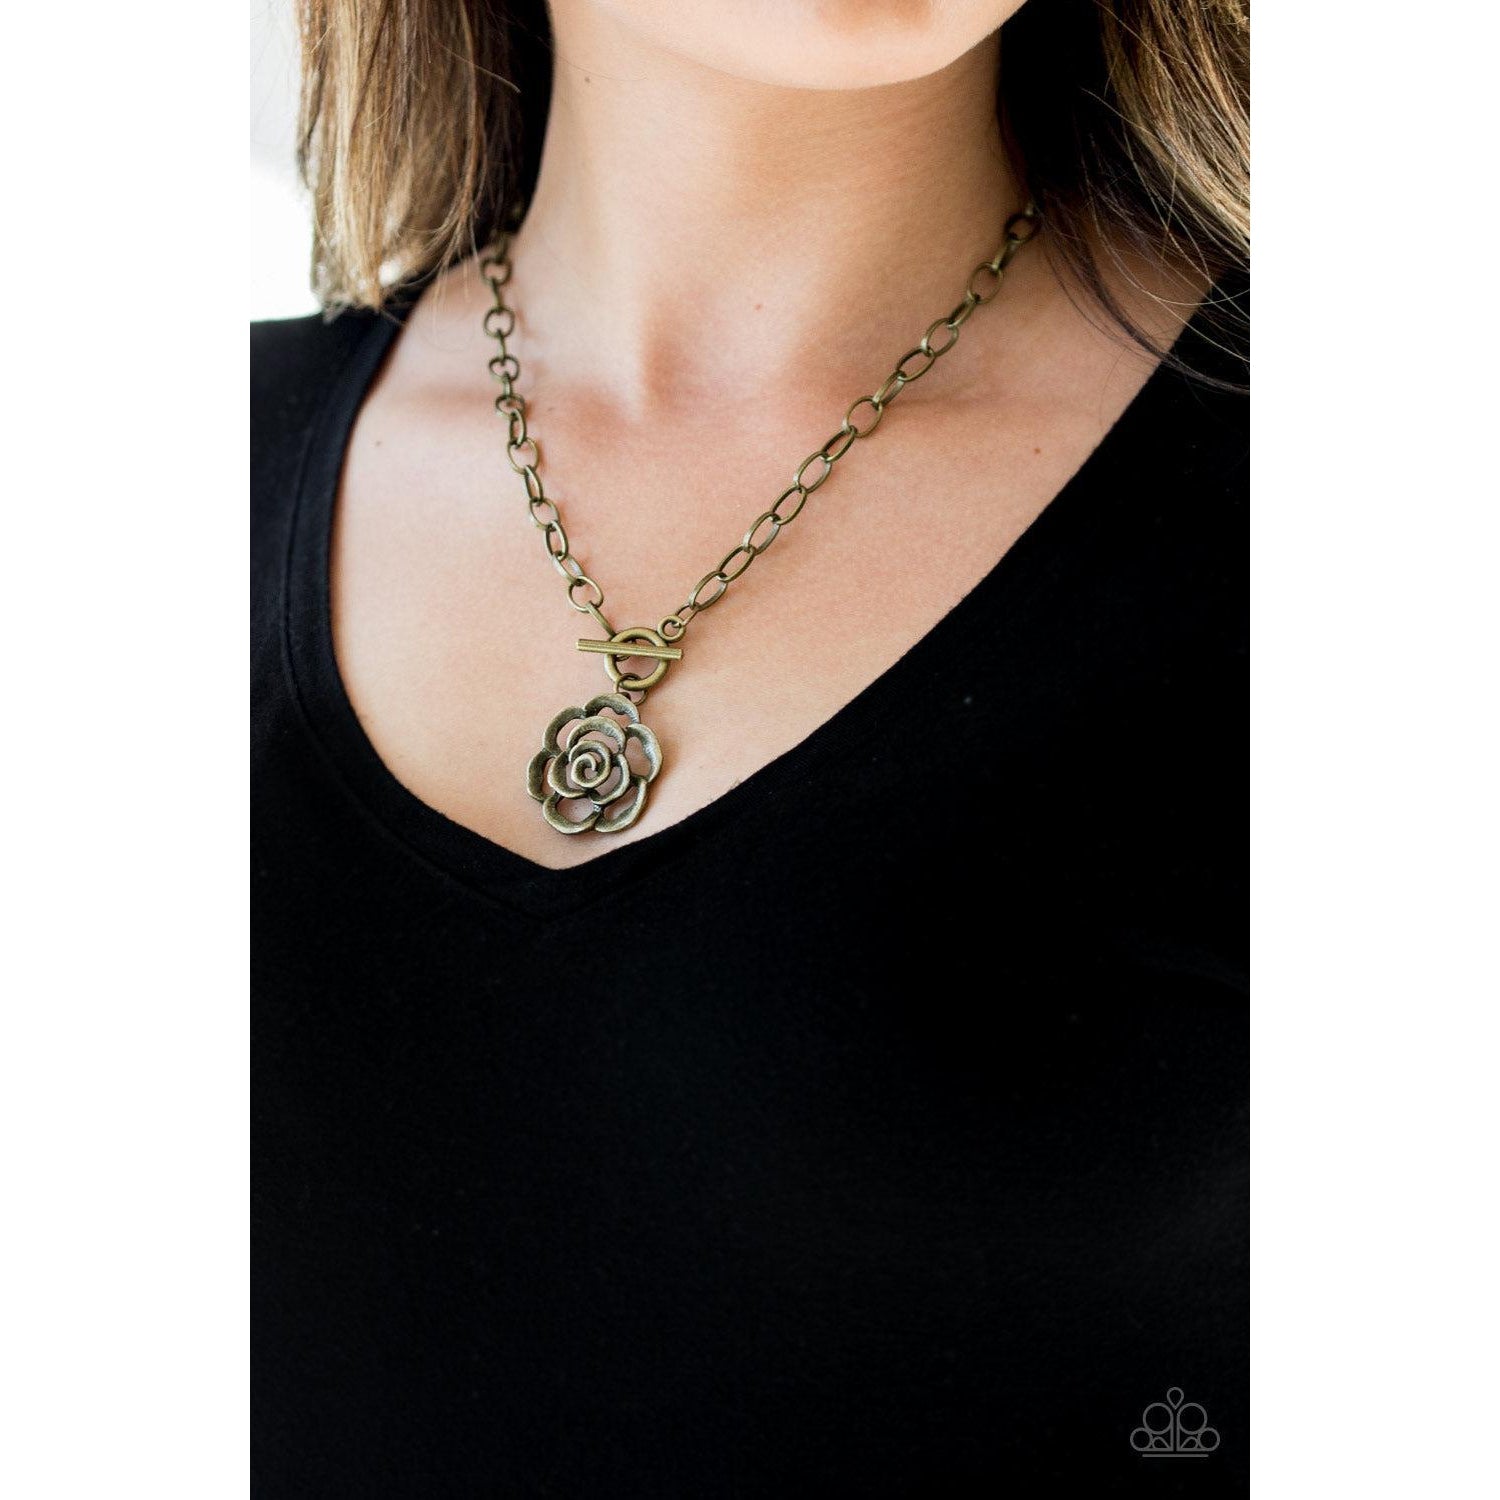 Paparazzi "Beautifully In Bloom - Brass" Rosebud Necklace & Earrings Set-Necklace-SPARKLE ARMAND